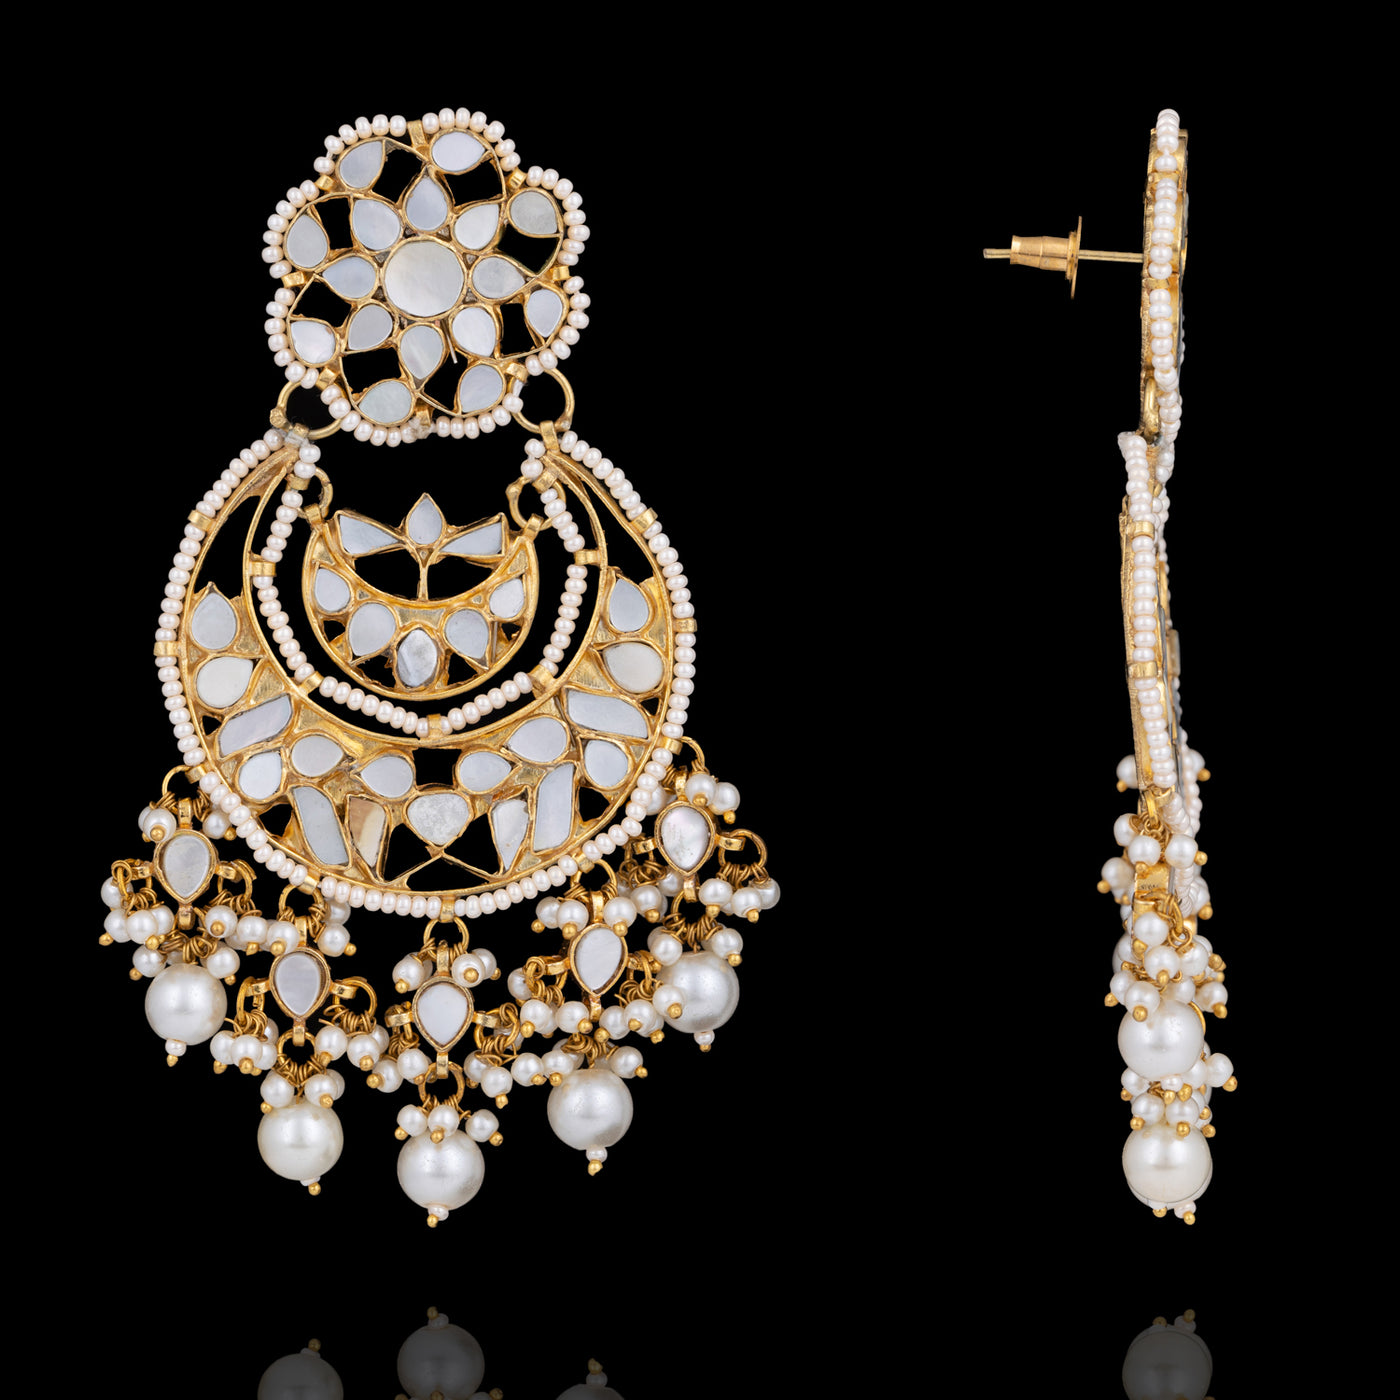 Arvi Earrings - Available in 2 Options